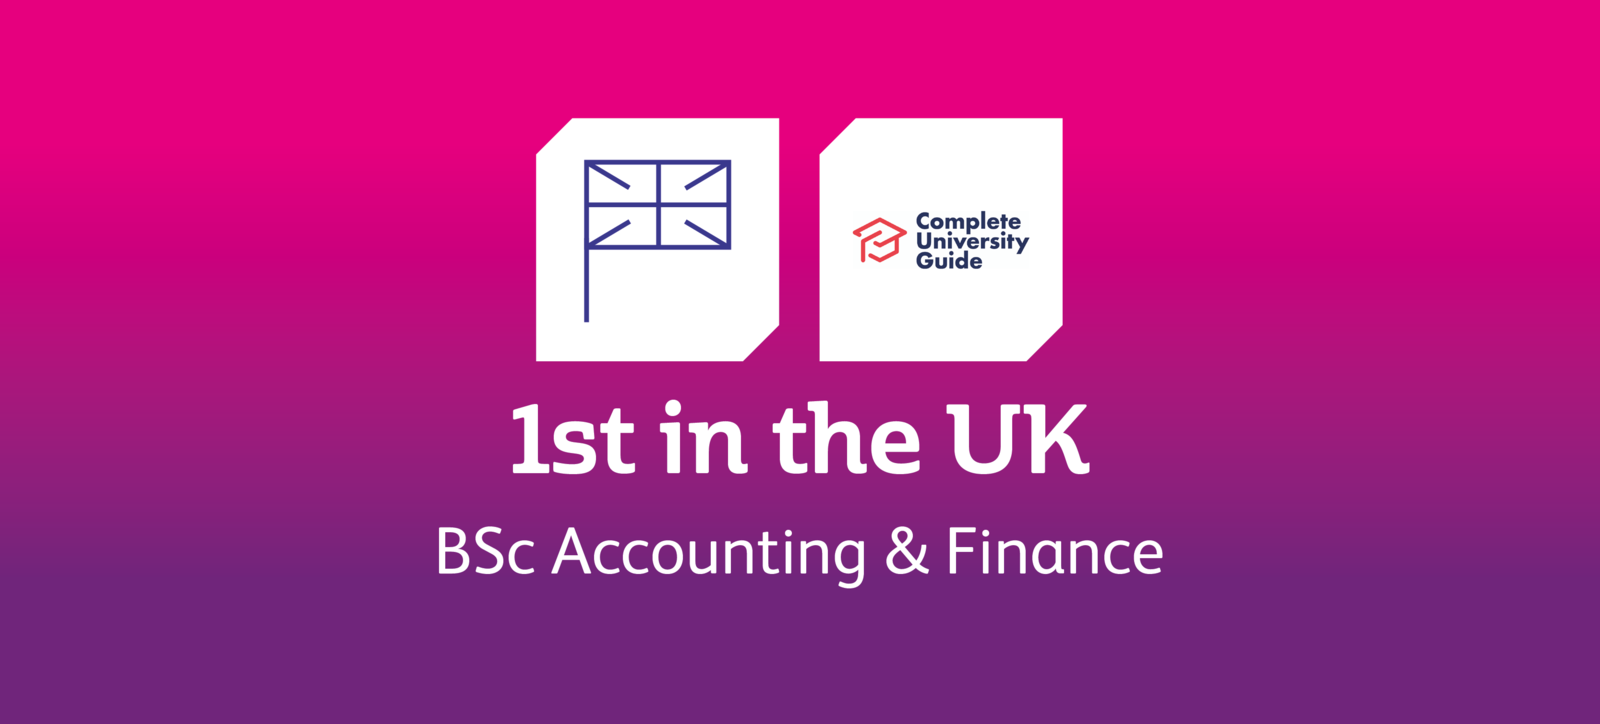 Warwick Business School has been ranked number one in the UK for Accounting and Finance